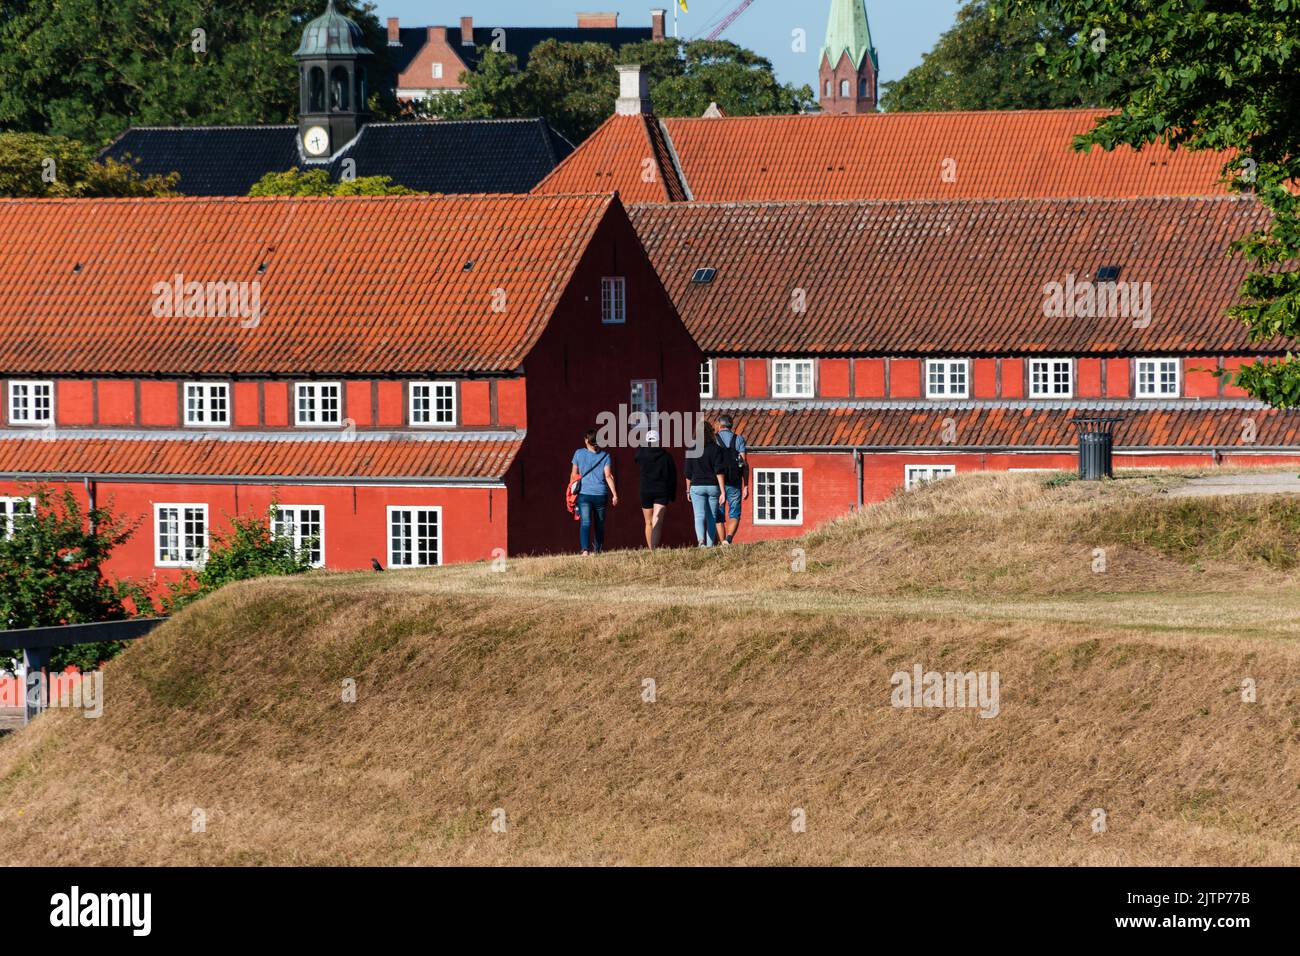 Copenhagen, Denmark. August 13, 2022.  People walking on top of the ramparts in Kastellet, with red barracks in the background Stock Photo